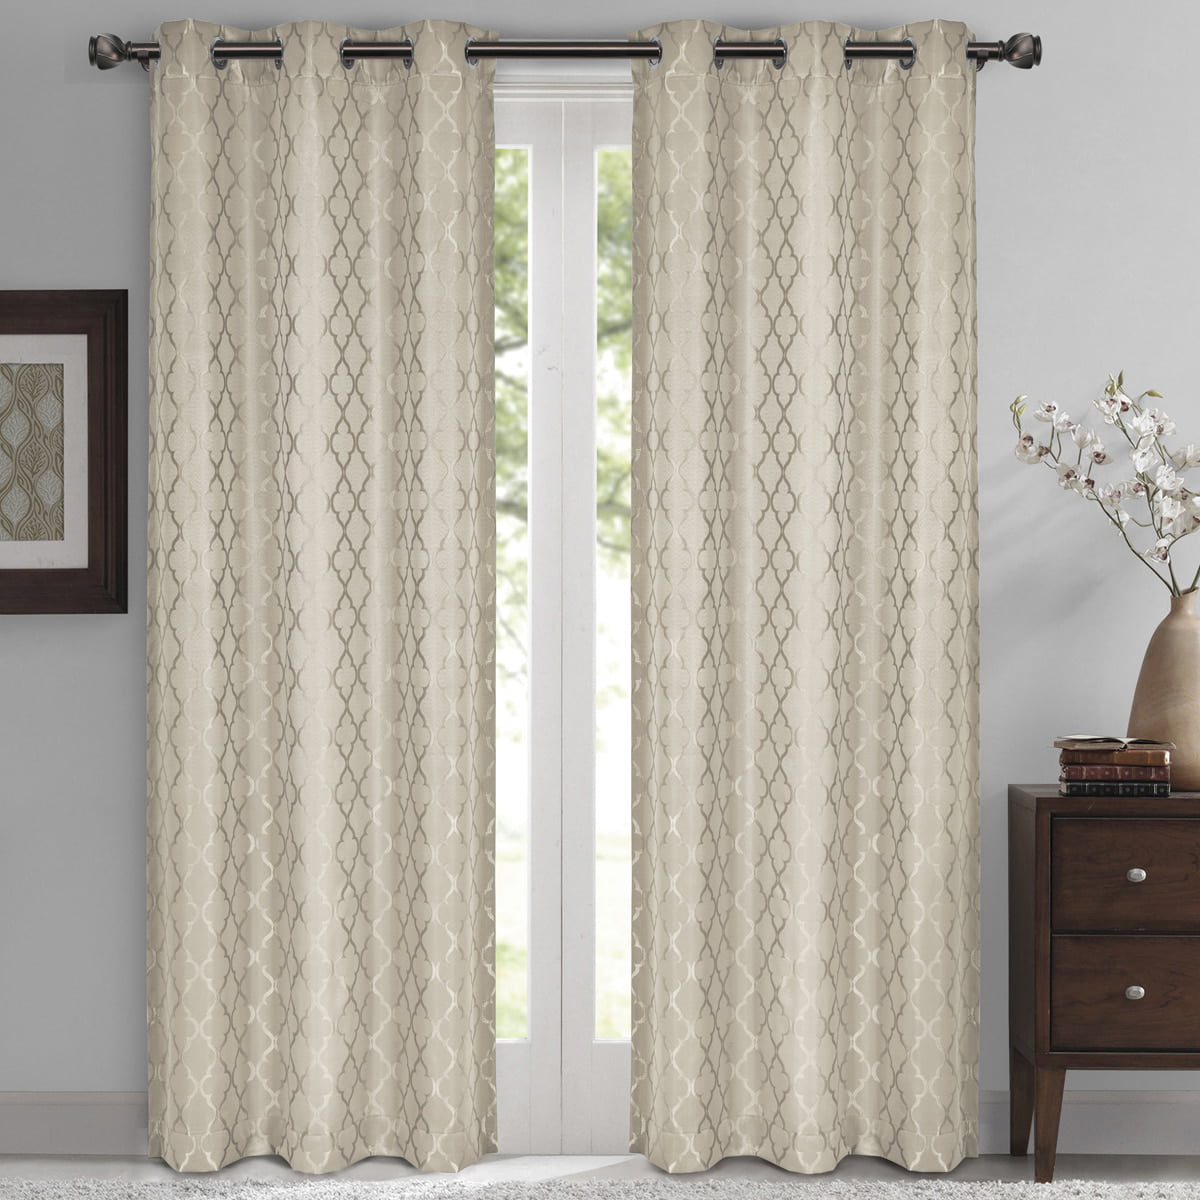 Willow Jacquard Blackout Thermal Insulated Window Curtain Panels Pair Set of 2 